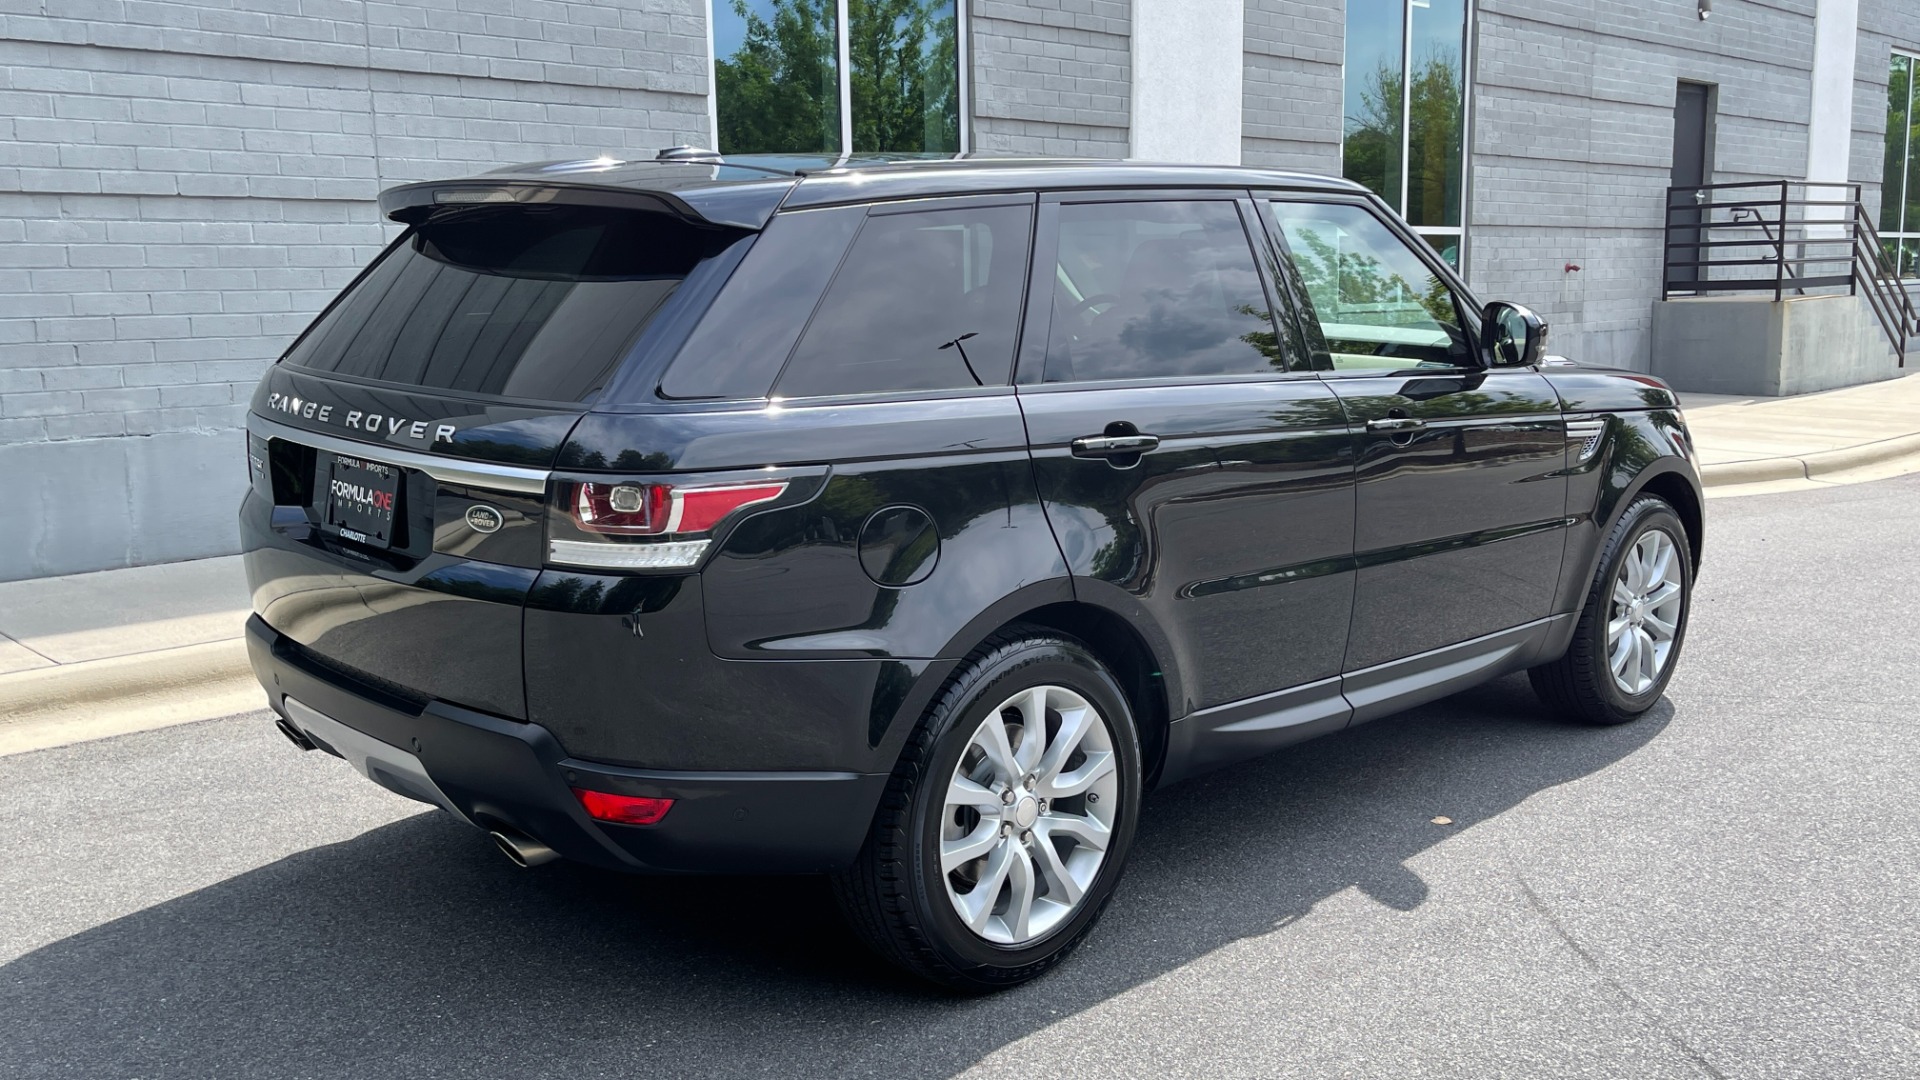 Used 2015 Land Rover Range Rover Sport HSE / SUPERCHARGED / MERIDIAN SOUND / DRIVER ASSISTANCE / PANORAMIC ROOF /  for sale Sold at Formula Imports in Charlotte NC 28227 4